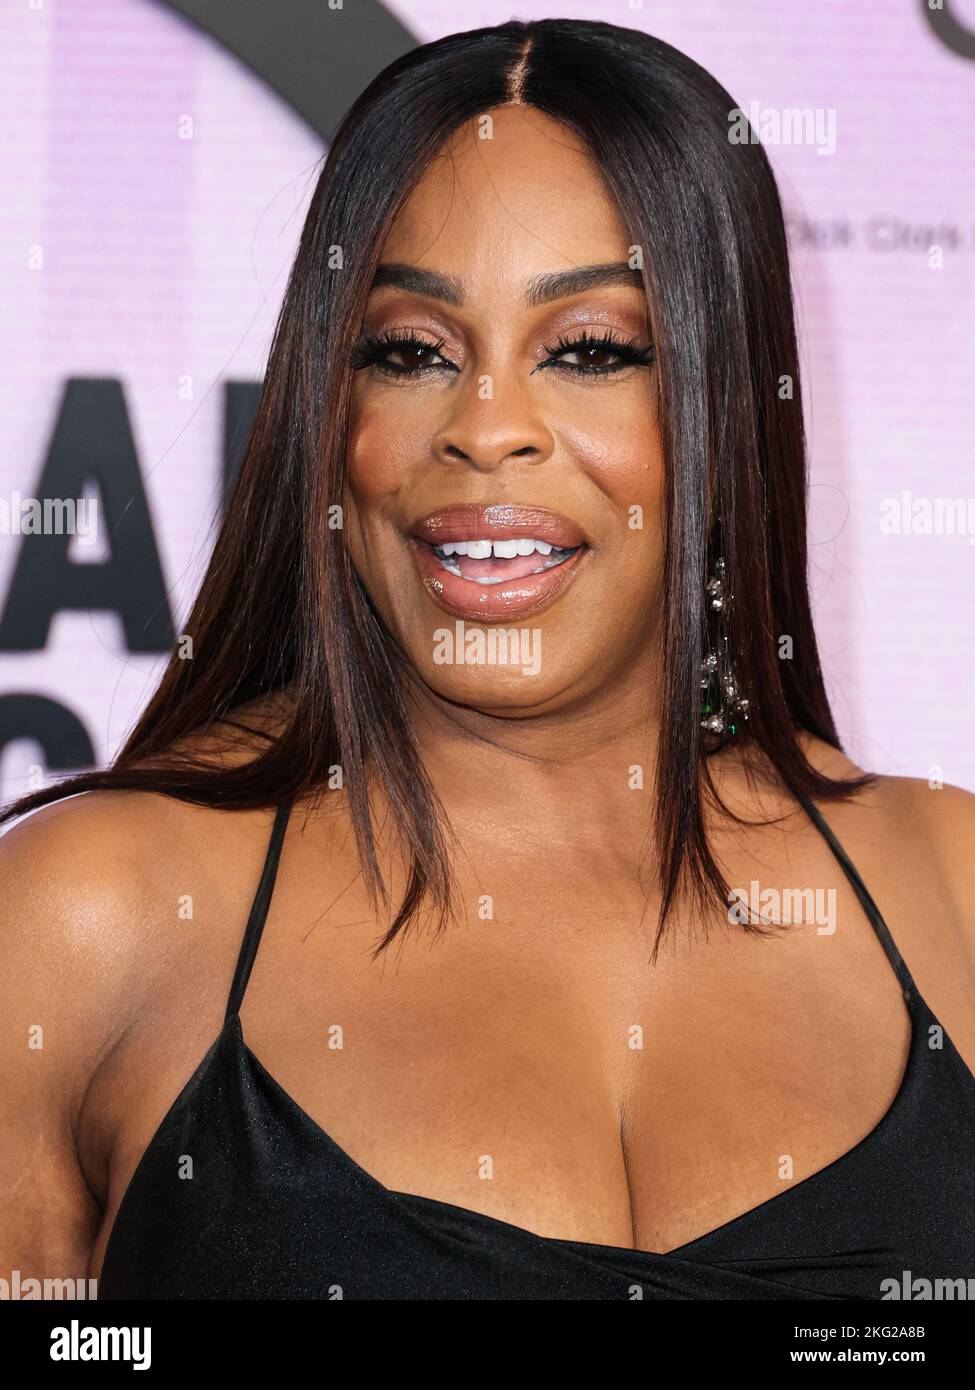 Los Angeles, United States. 20th Nov, 2022. LOS ANGELES, CALIFORNIA, USA - NOVEMBER 20: Niecy Nash Betts arrives at the 2022 American Music Awards (50th Annual American Music Awards) held at Microsoft Theater at L.A. Live on November 20, 2022 in Los Angeles, California, United States. (Photo by Xavier Collin/Image Press Agency) Credit: Image Press Agency/Alamy Live News Stock Photo